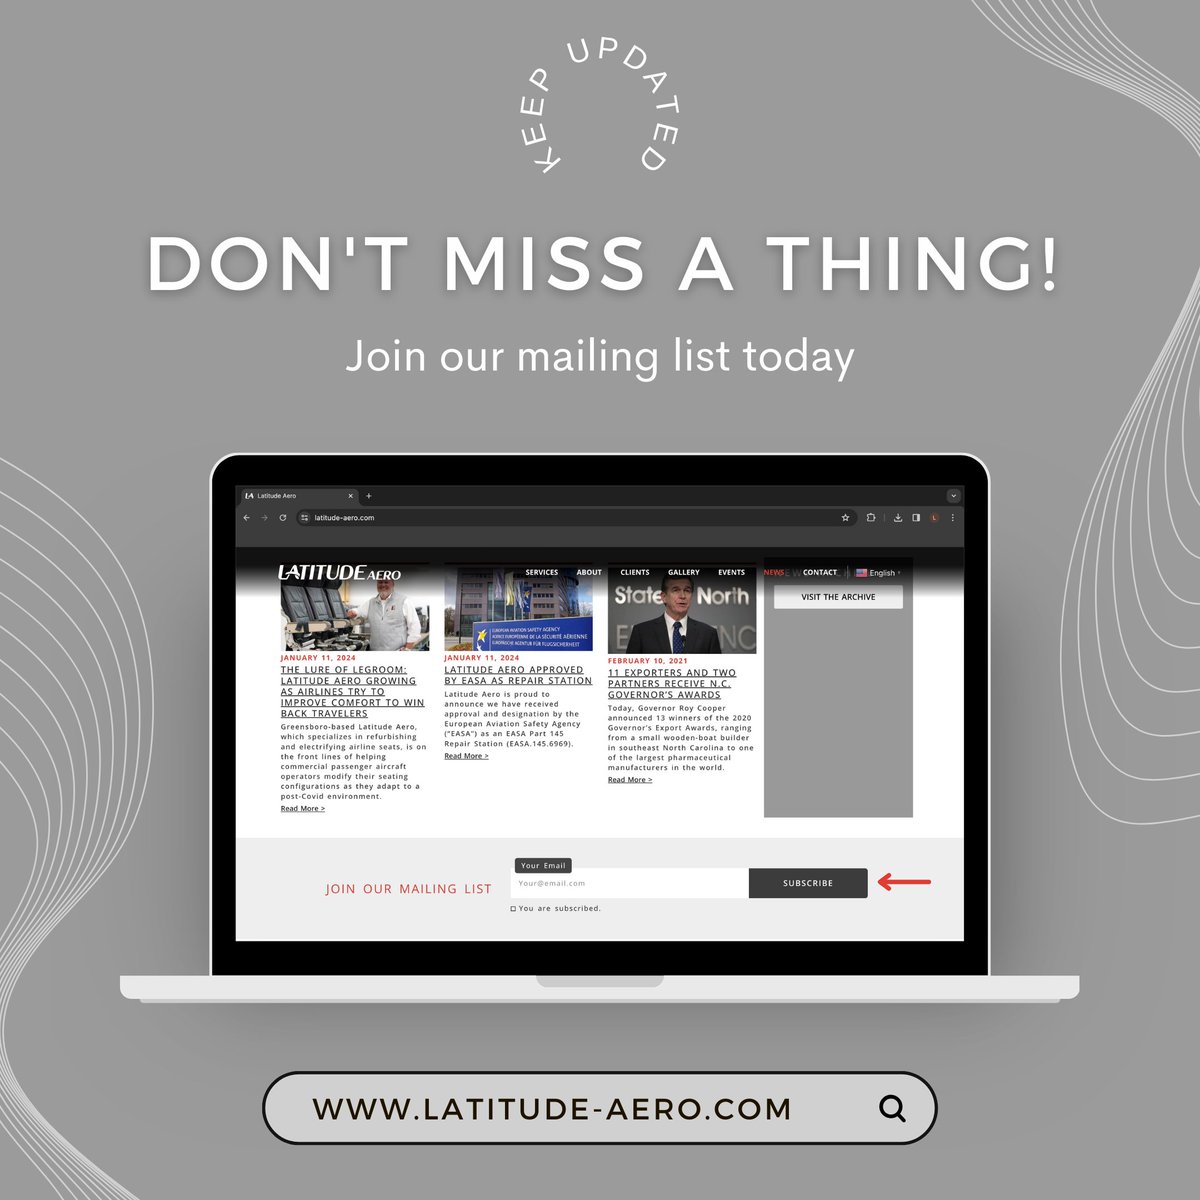 ✈️ Stay in the loop with all things Latitude Aero! 🌐 Subscribe to our #newsletter and be the first to know about exciting activities, events, and updates. 📬 Don't miss out – sign up now at latitude-aero.com! #LatitudeAero #StayInformed #SubscribeNow #Aviation…